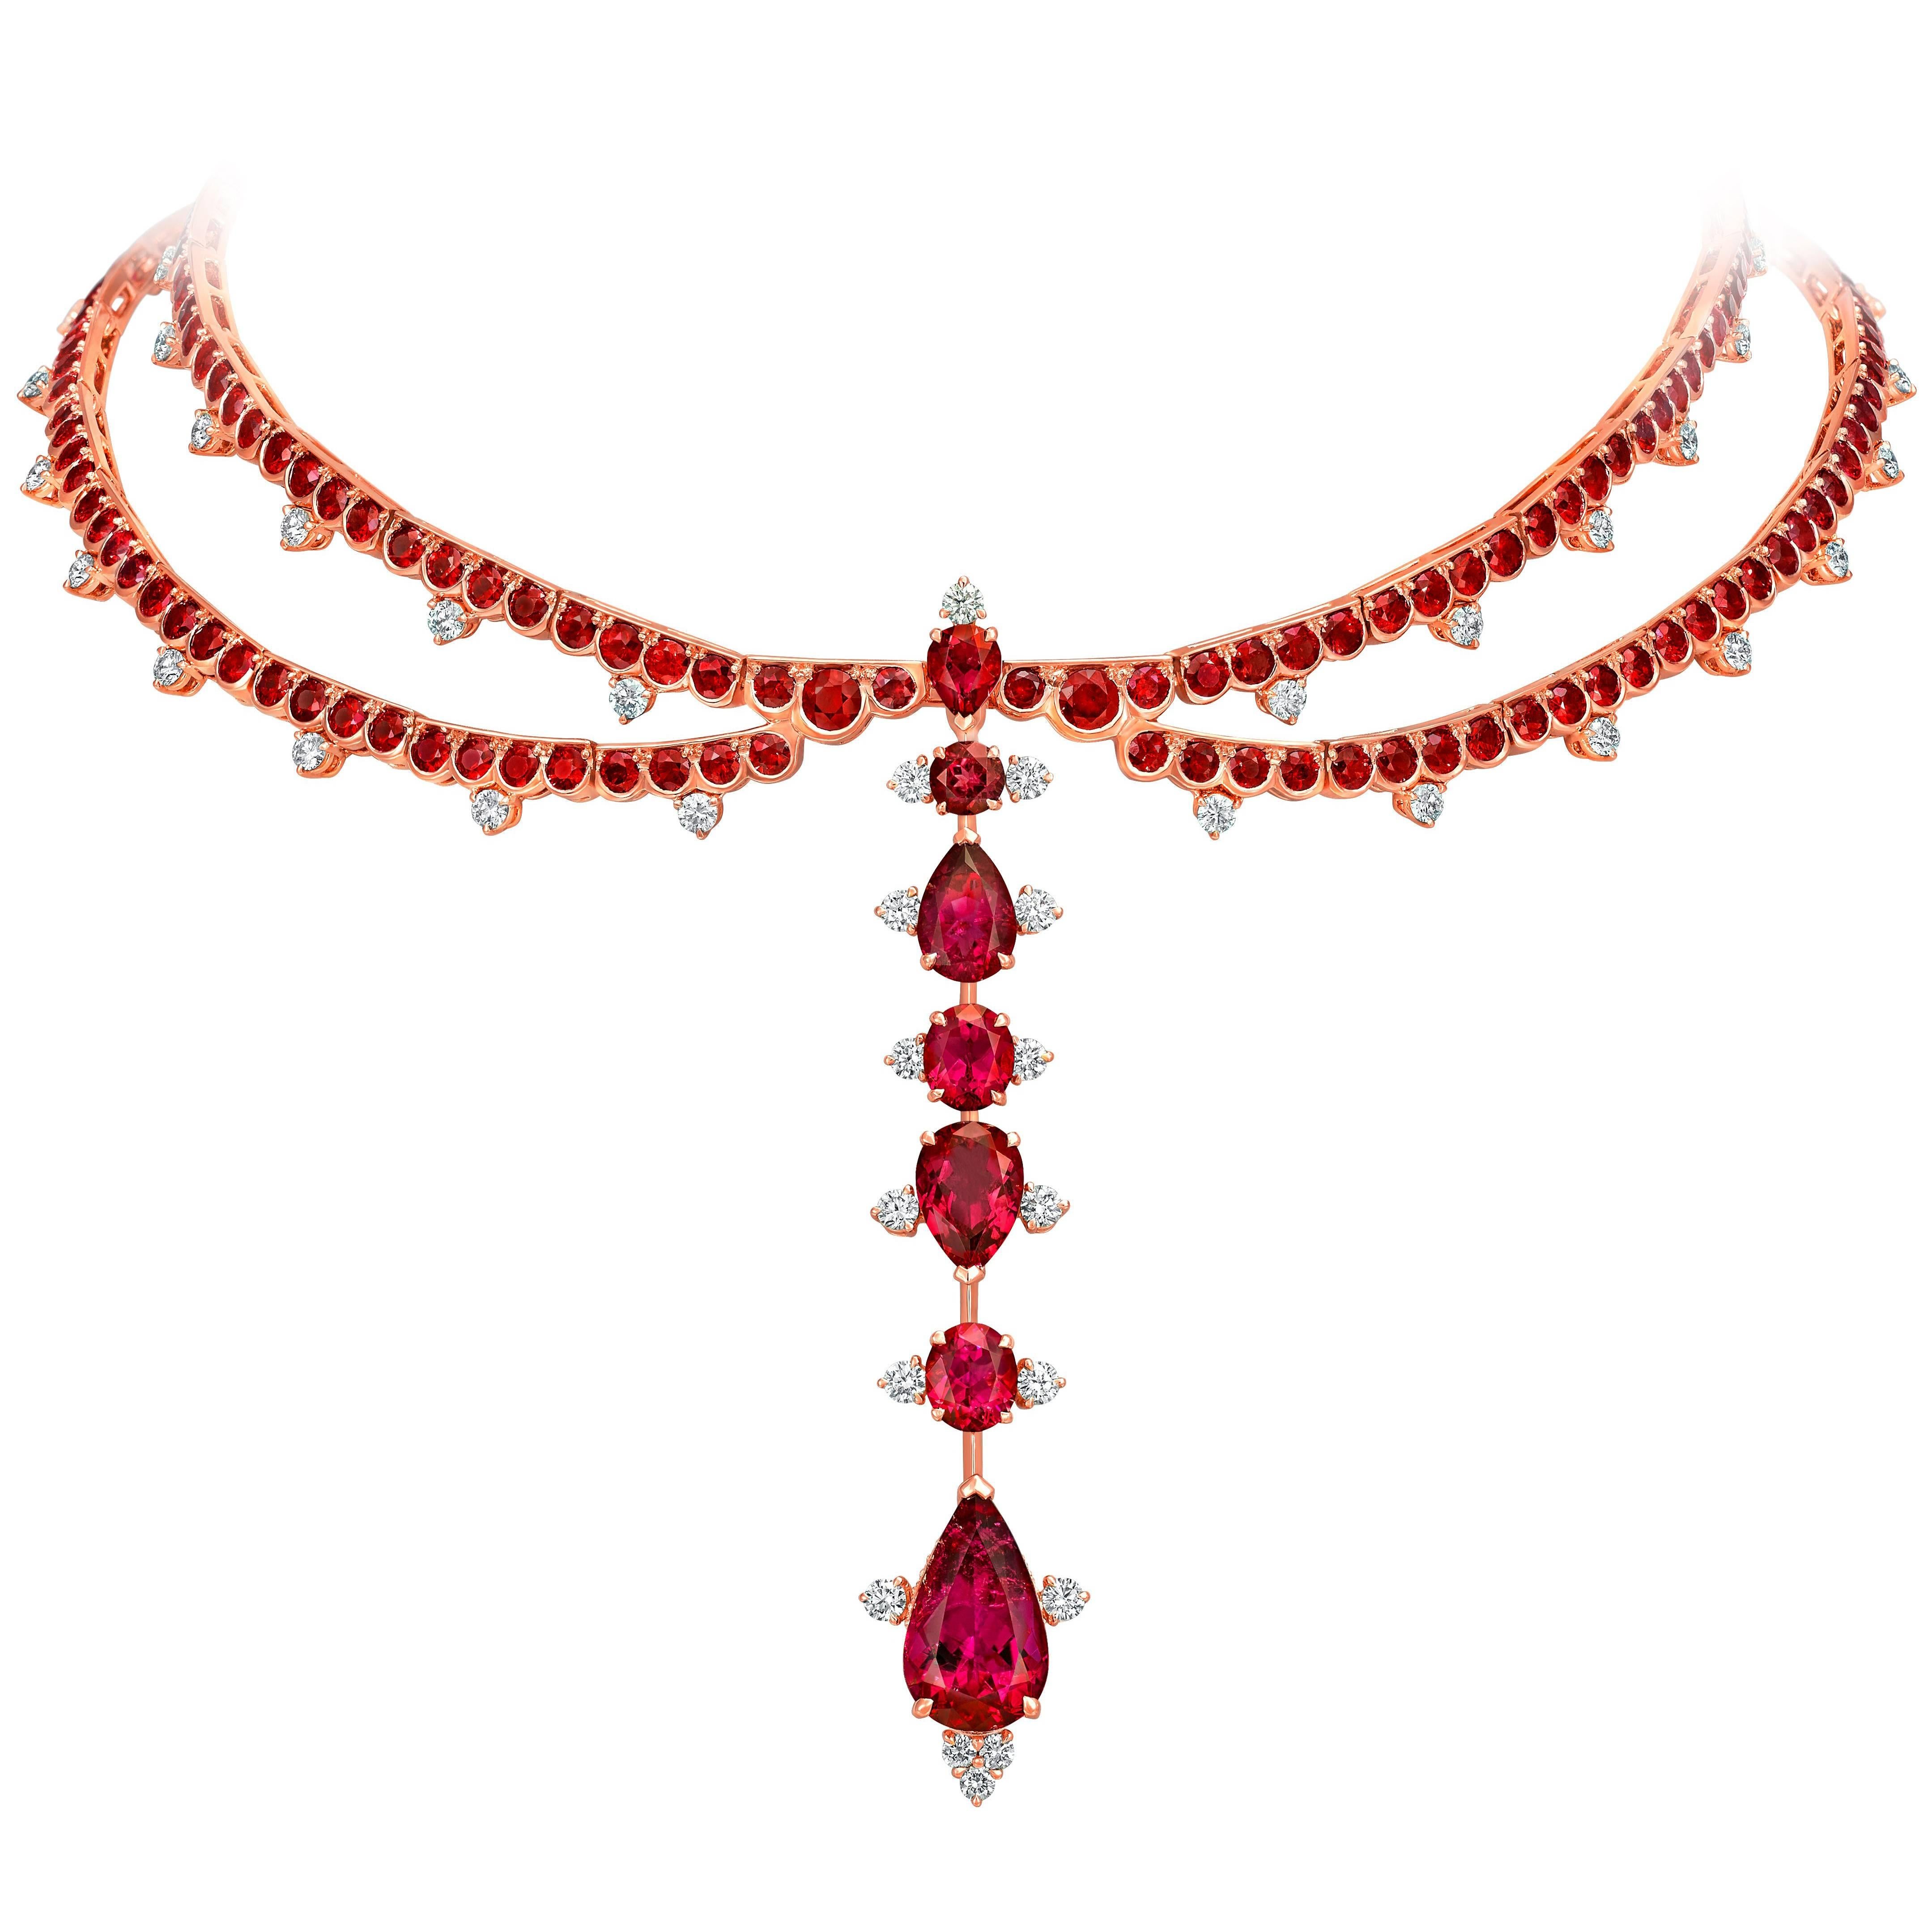 Rose Gold, White Diamonds Mozambican Ruby and Rubellite Choker Necklace